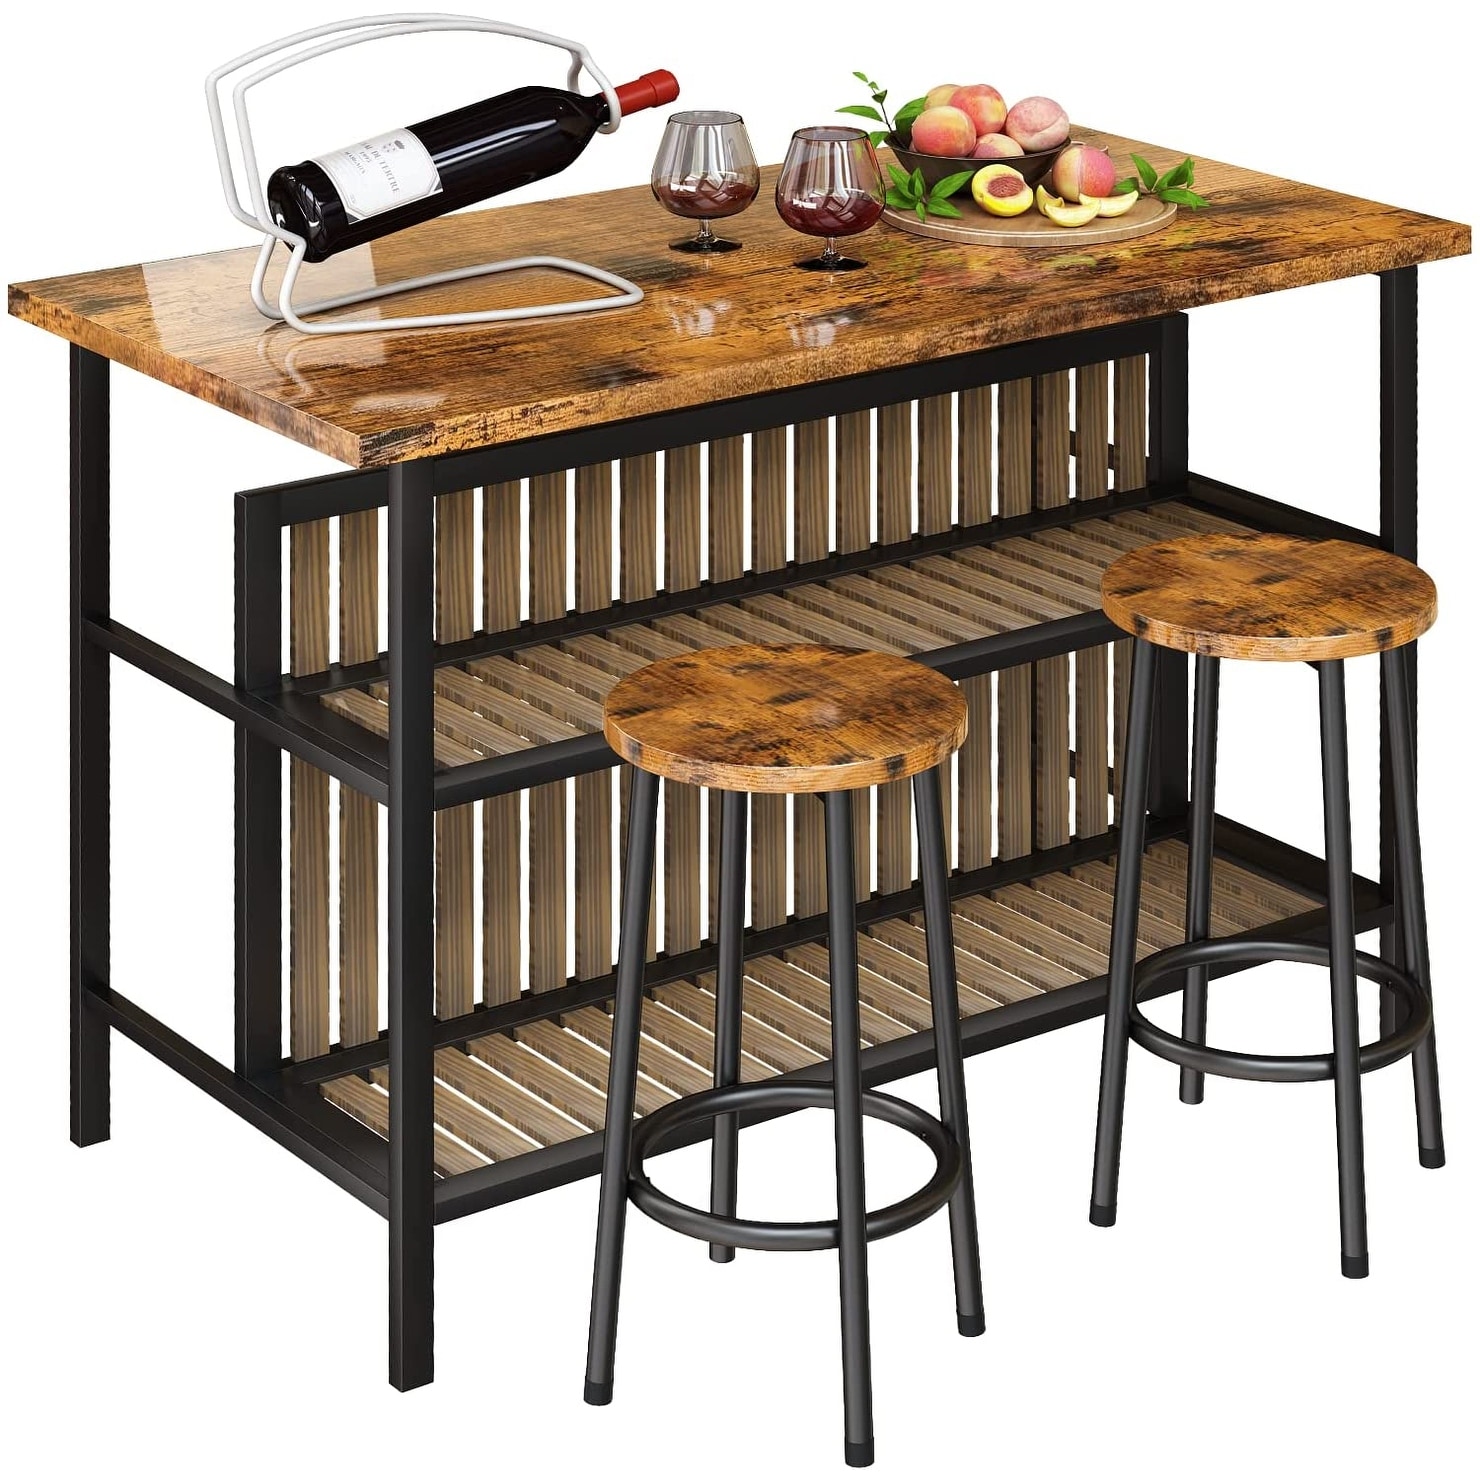 https://ak1.ostkcdn.com/images/products/is/images/direct/f0549fb0012e89b17a96025a5c34d673fecae381/Mieres-Kitchen-Island-with-2-Stools-and-Open-Shelves.jpg